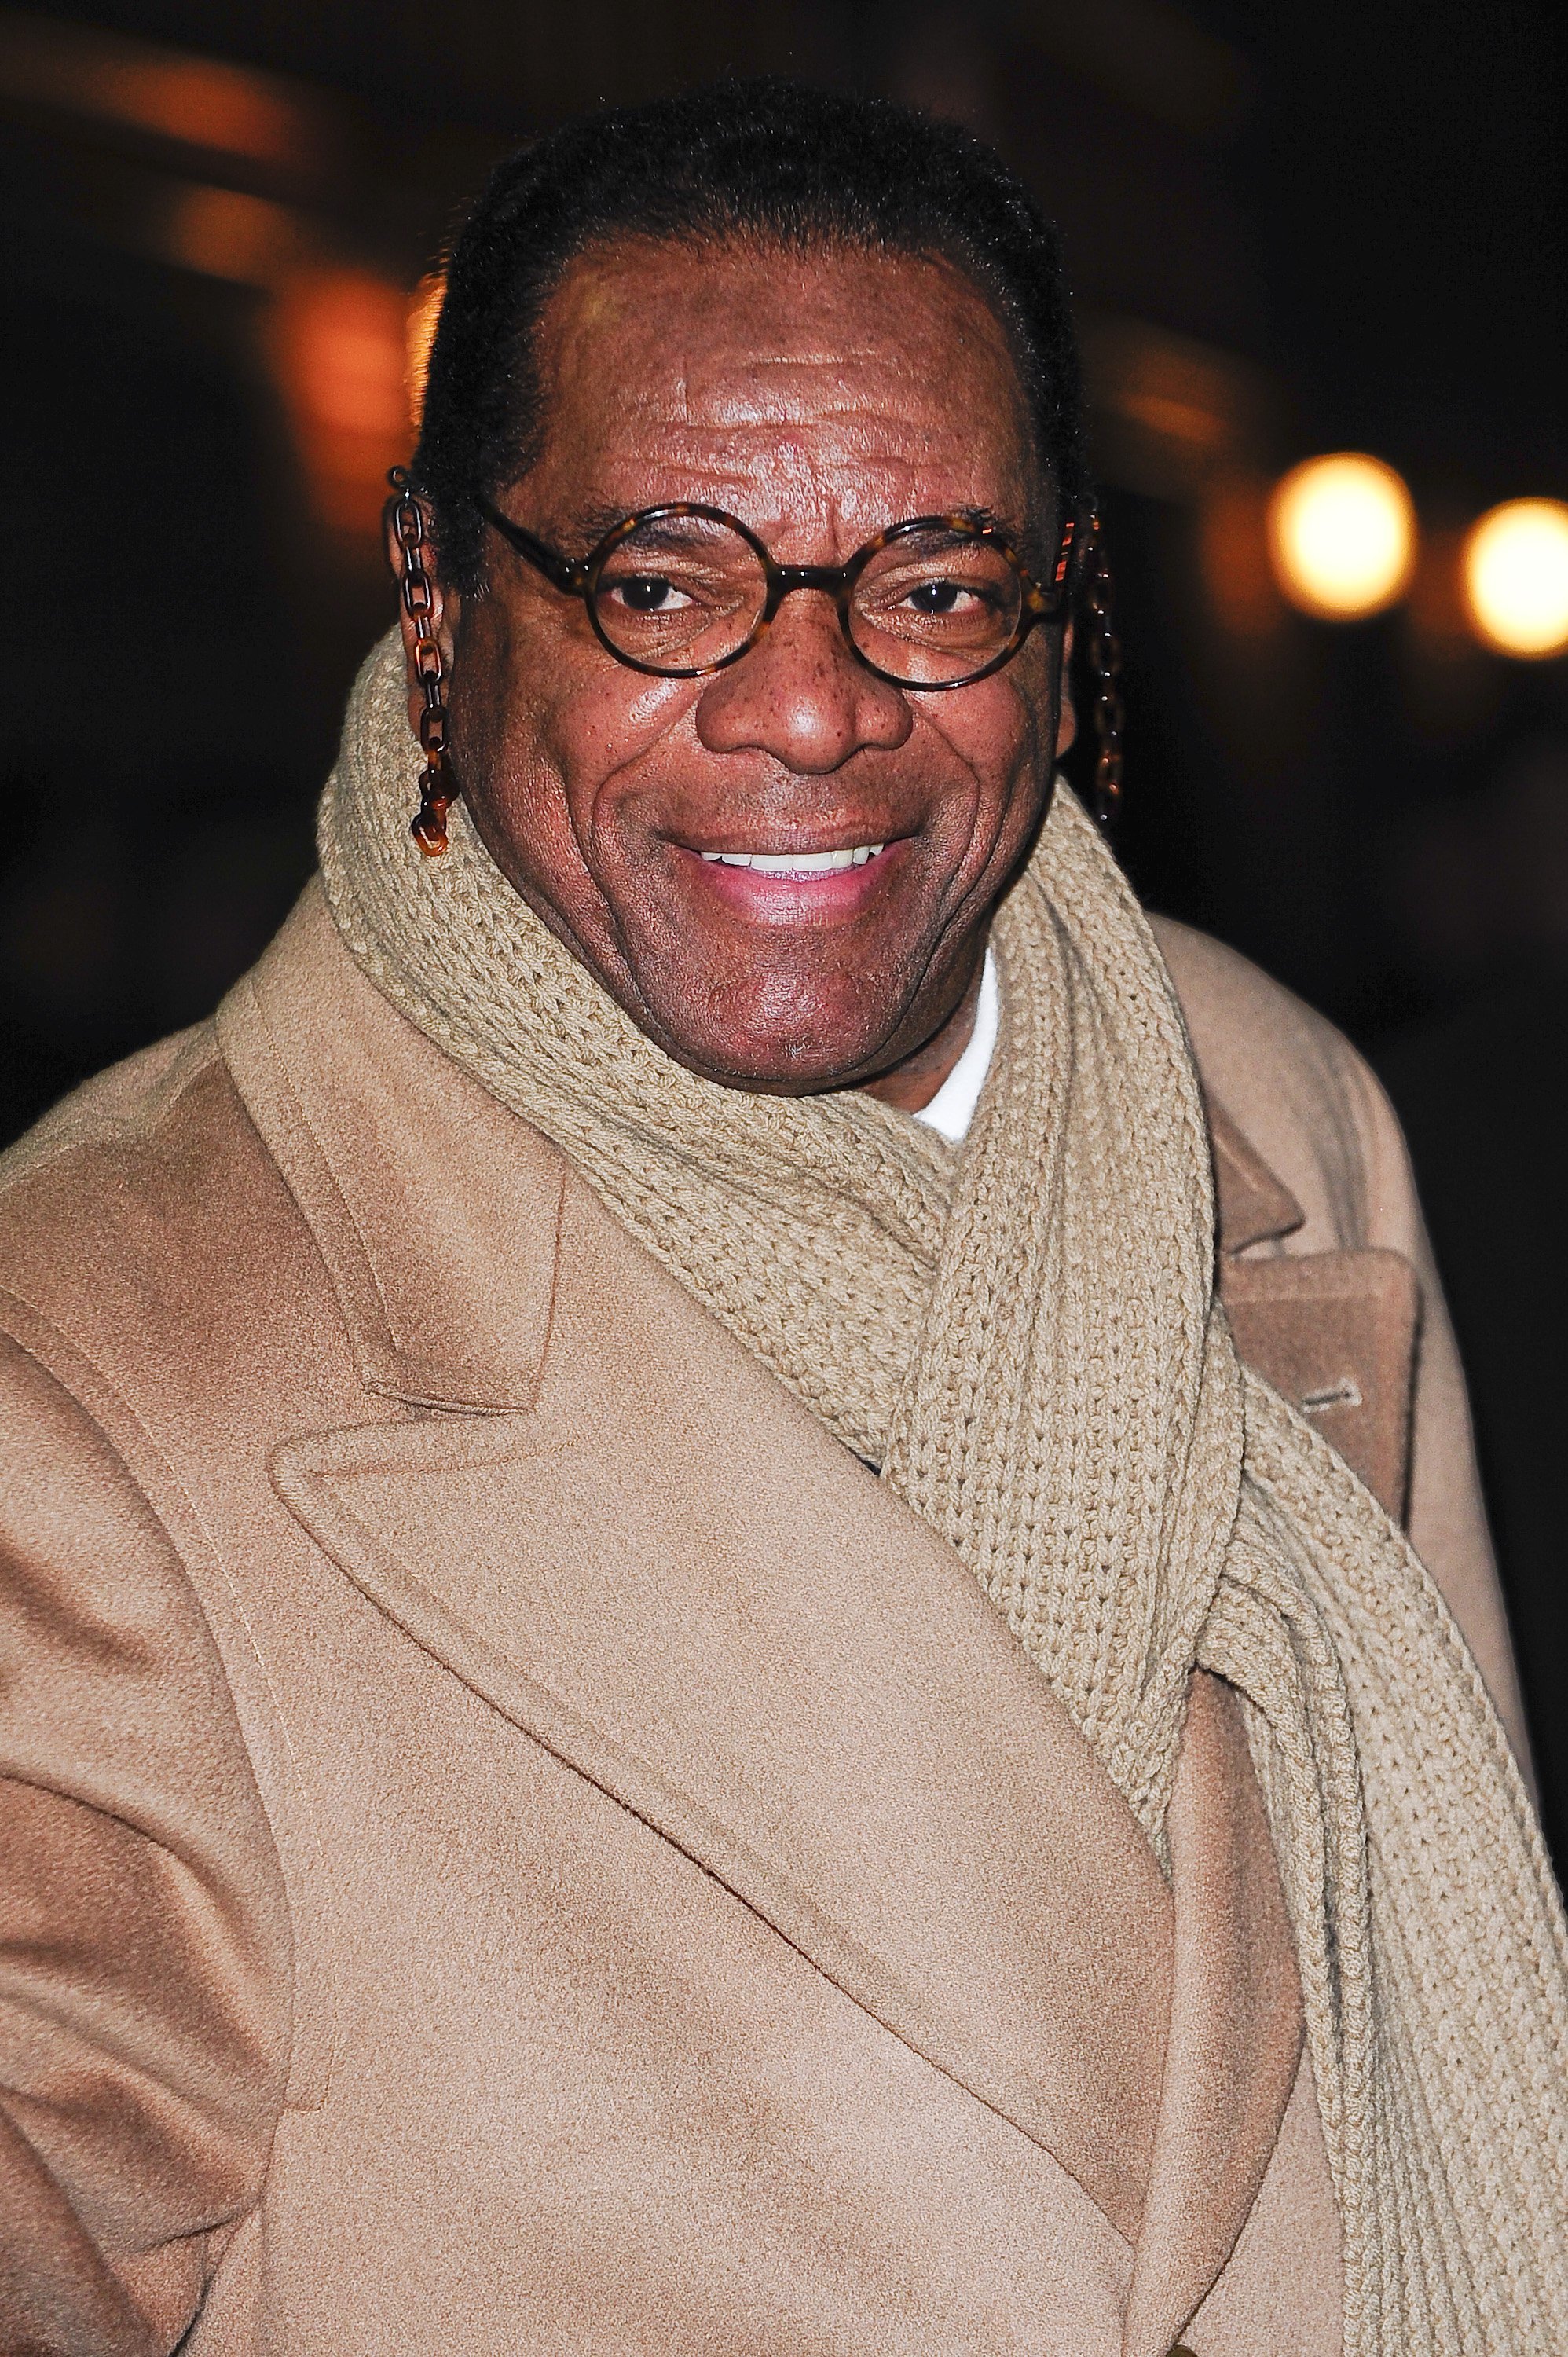 John Witherspoon visits the "Late Show With David Letterman" on December 21, 2009 in New York City. | Photo: Getty Images